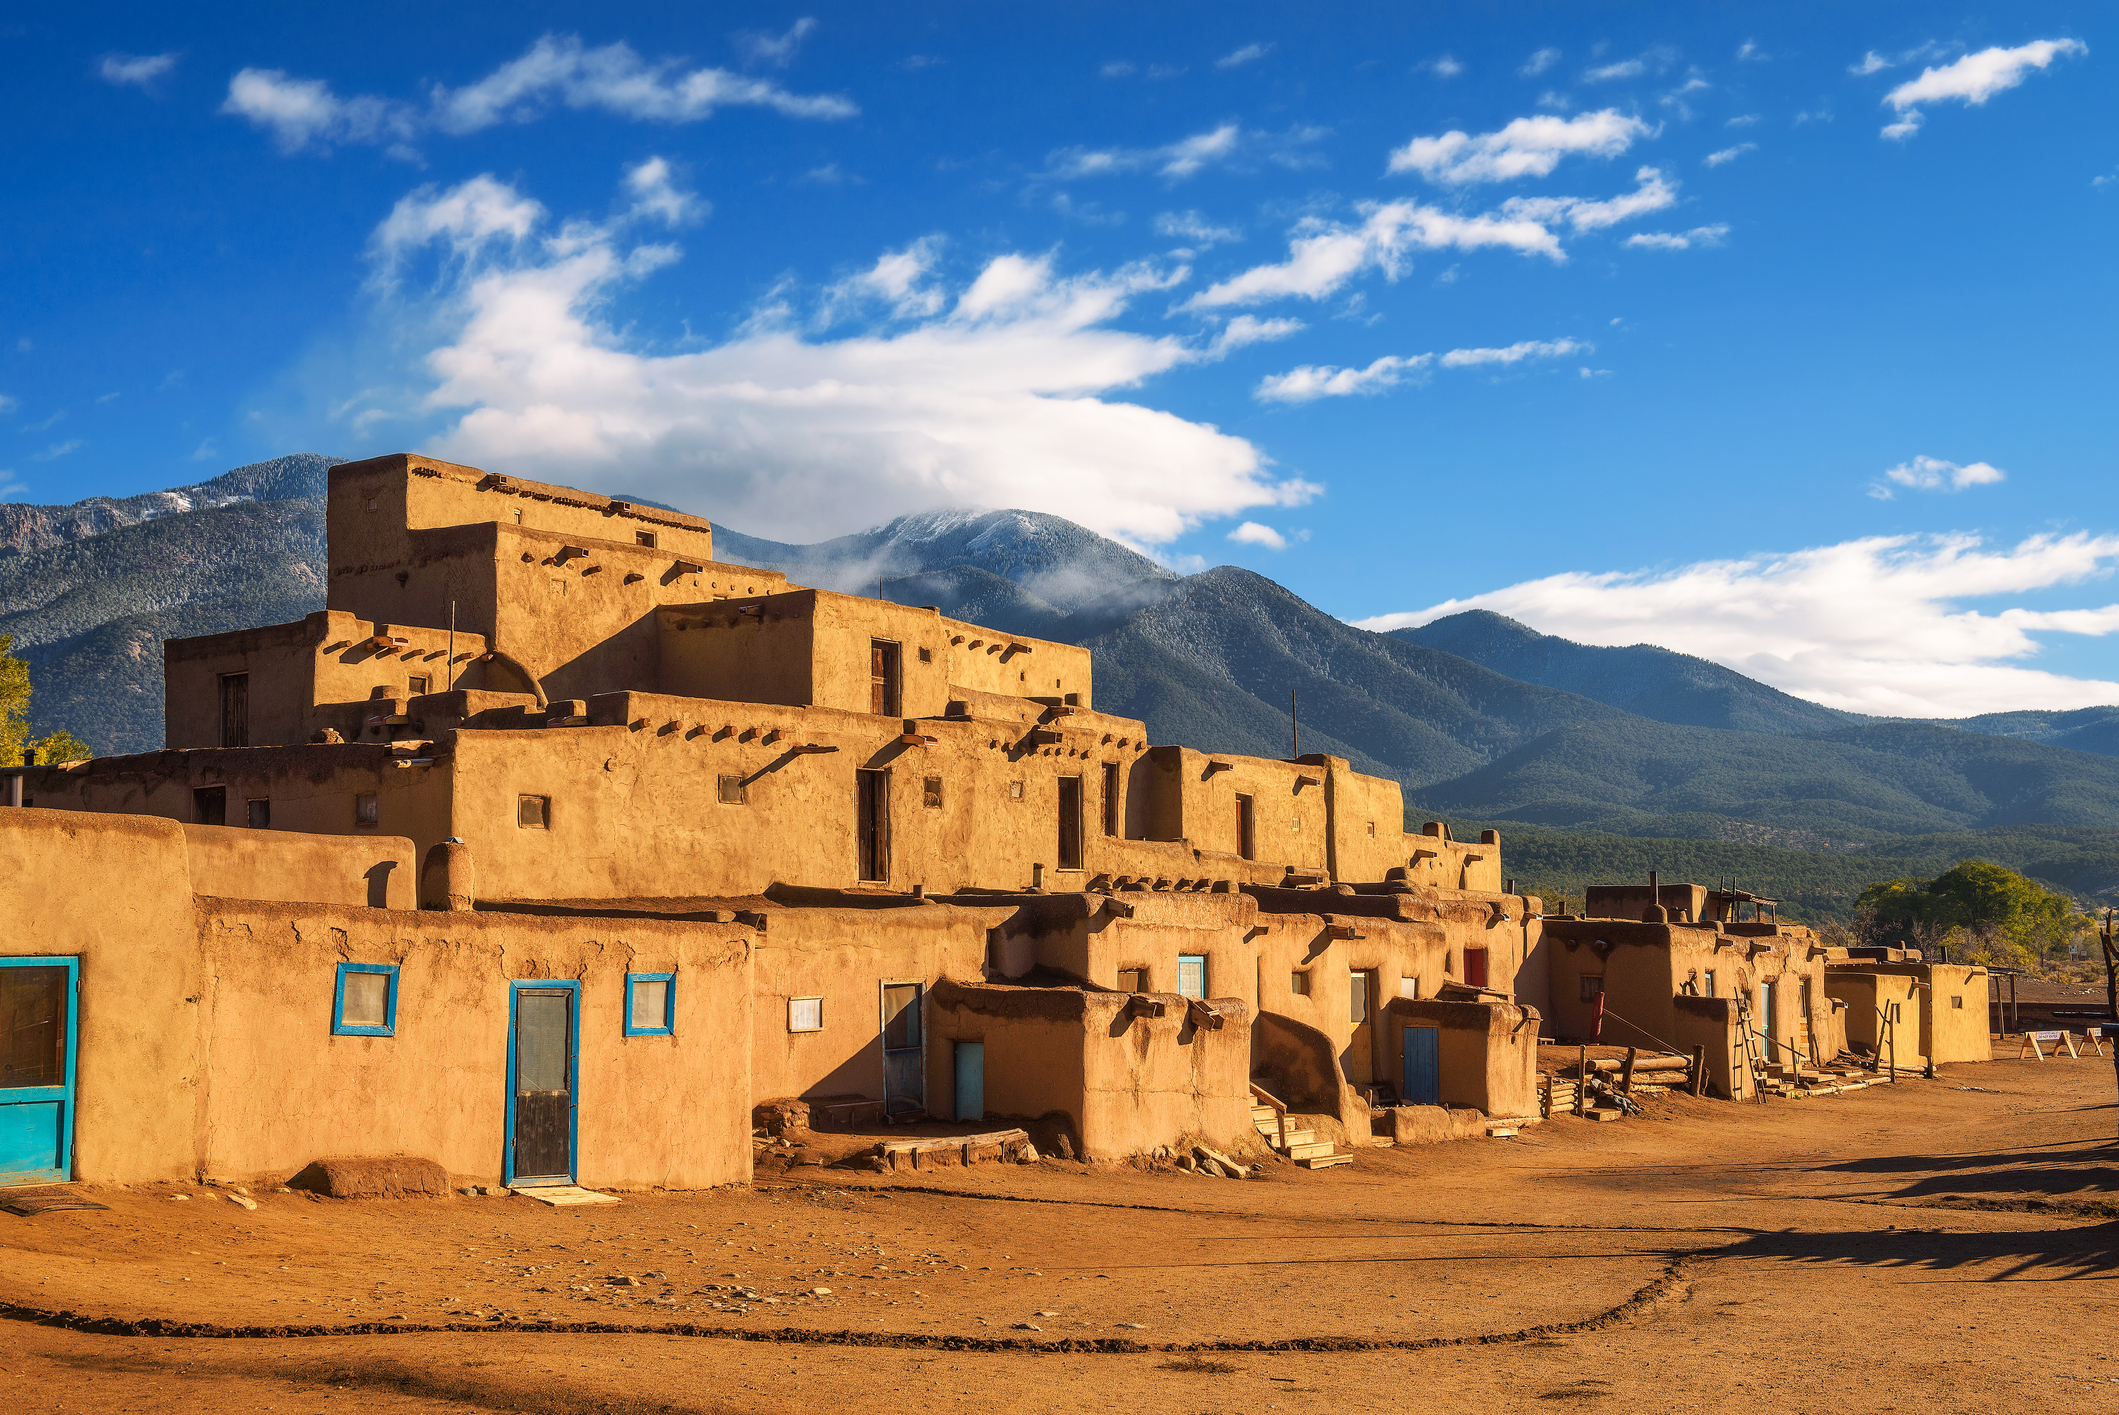 Ancient dwellings of Taos Pueblo in New Mexico on sunny day